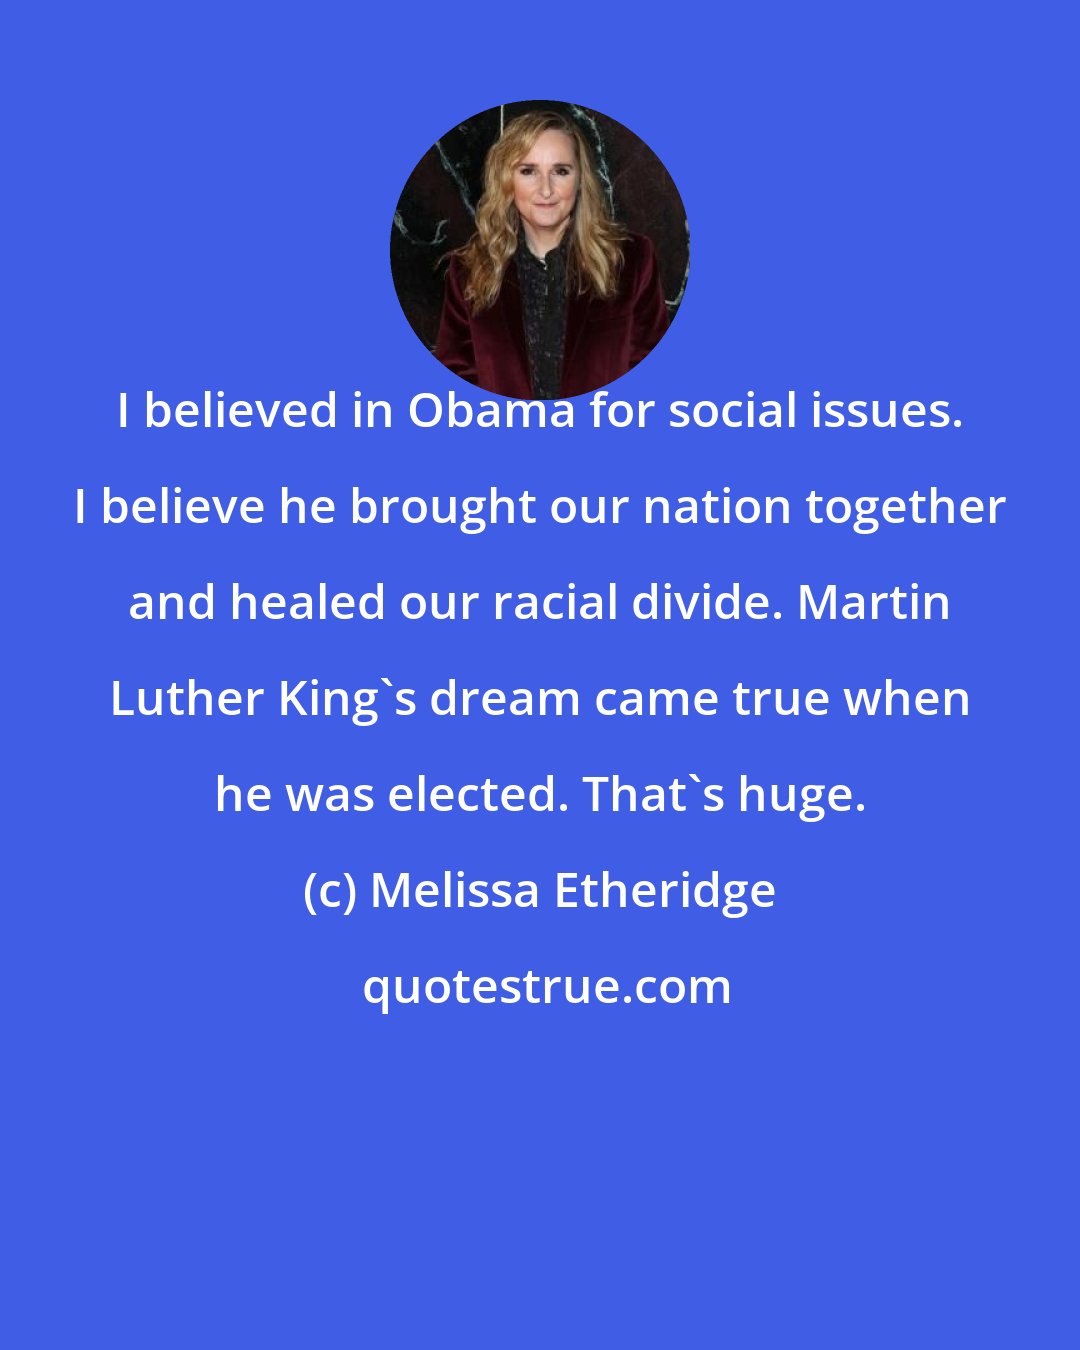 Melissa Etheridge: I believed in Obama for social issues. I believe he brought our nation together and healed our racial divide. Martin Luther King's dream came true when he was elected. That's huge.